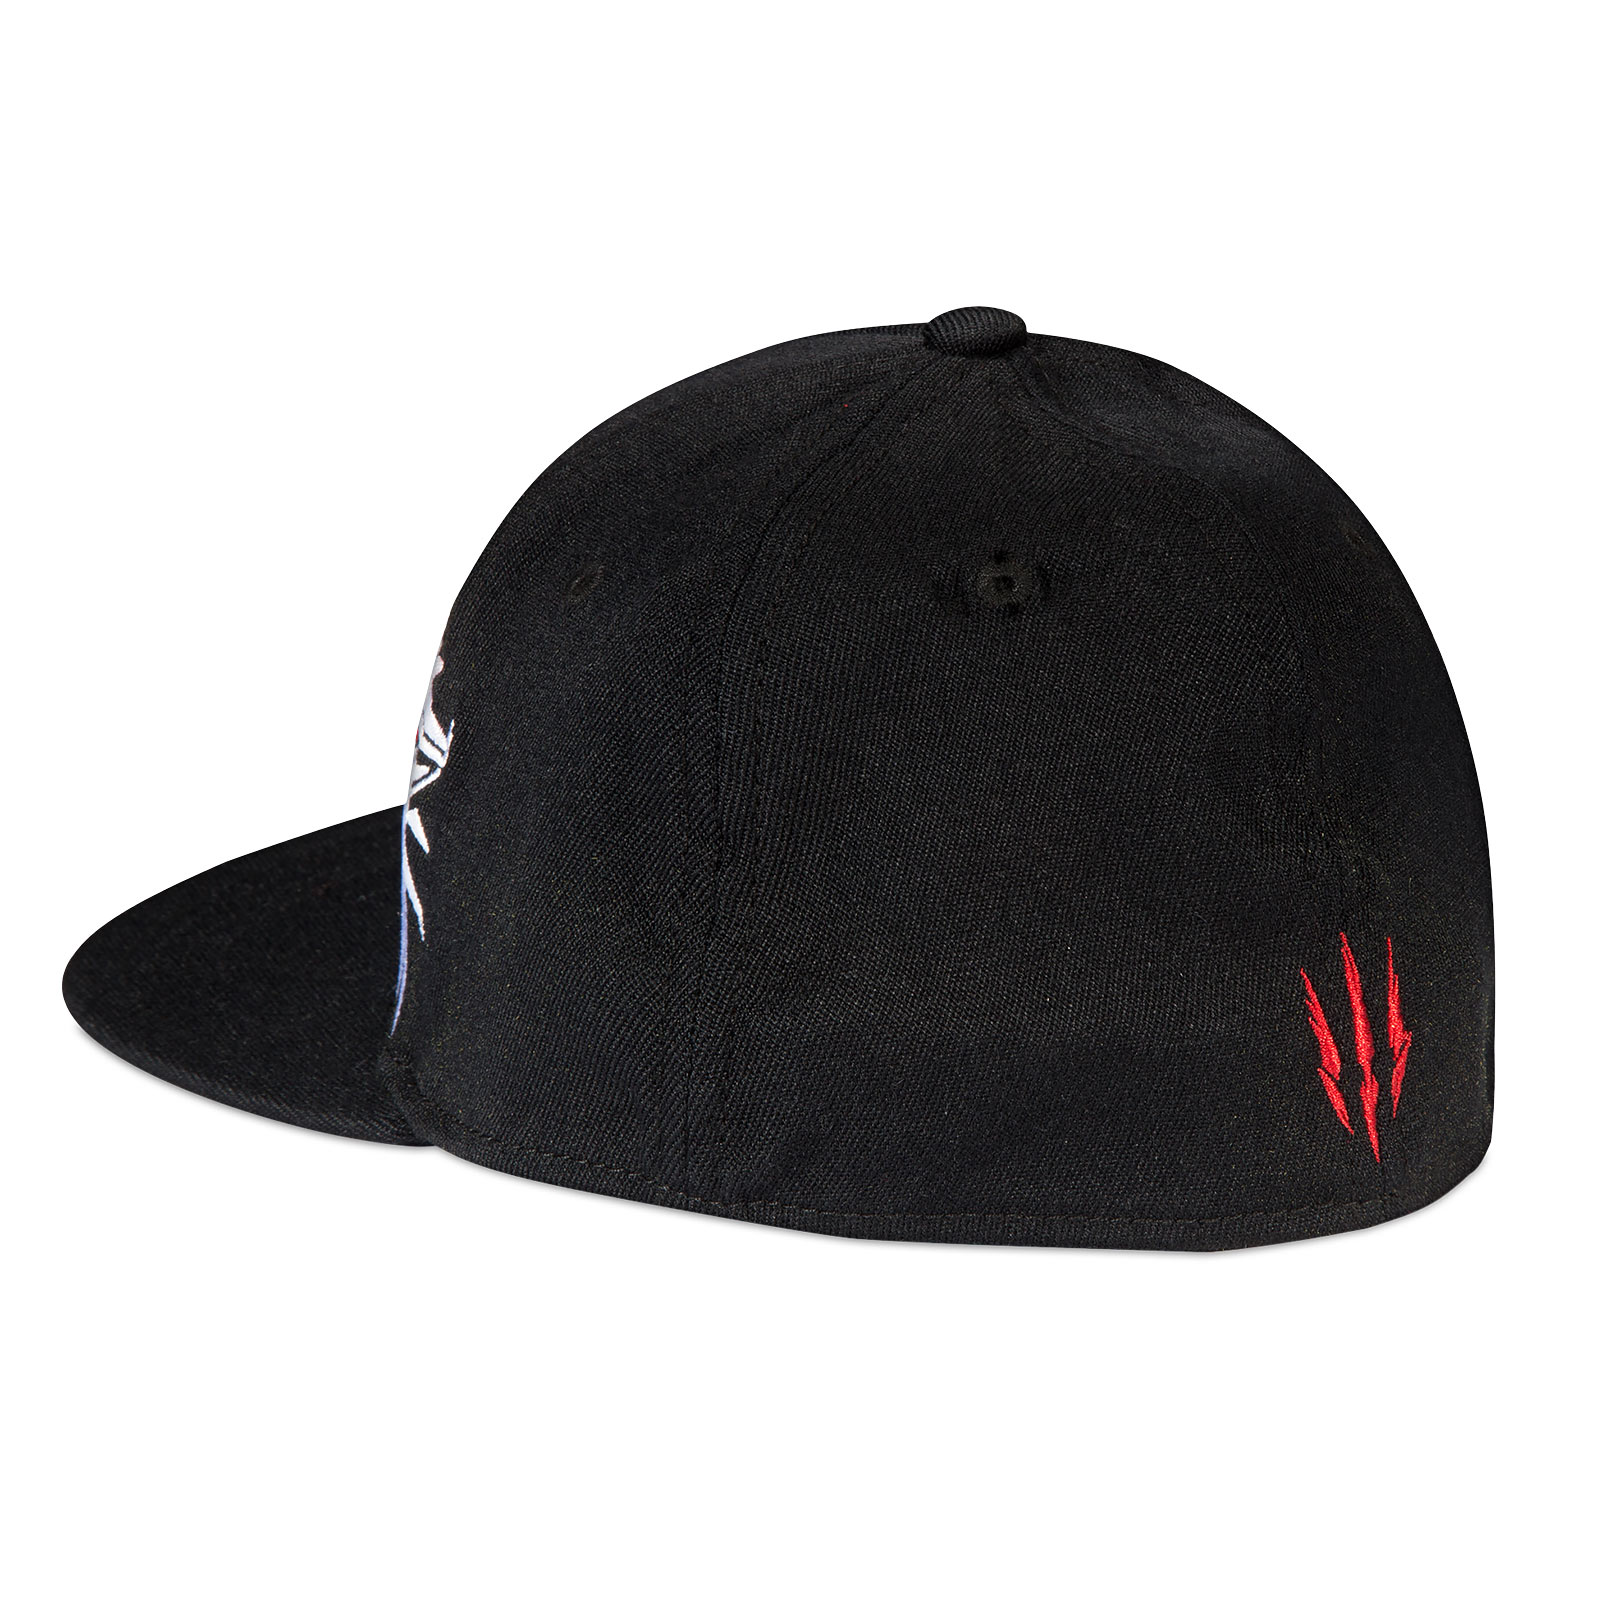 Witcher - Monsters Stretch Fit Basecap